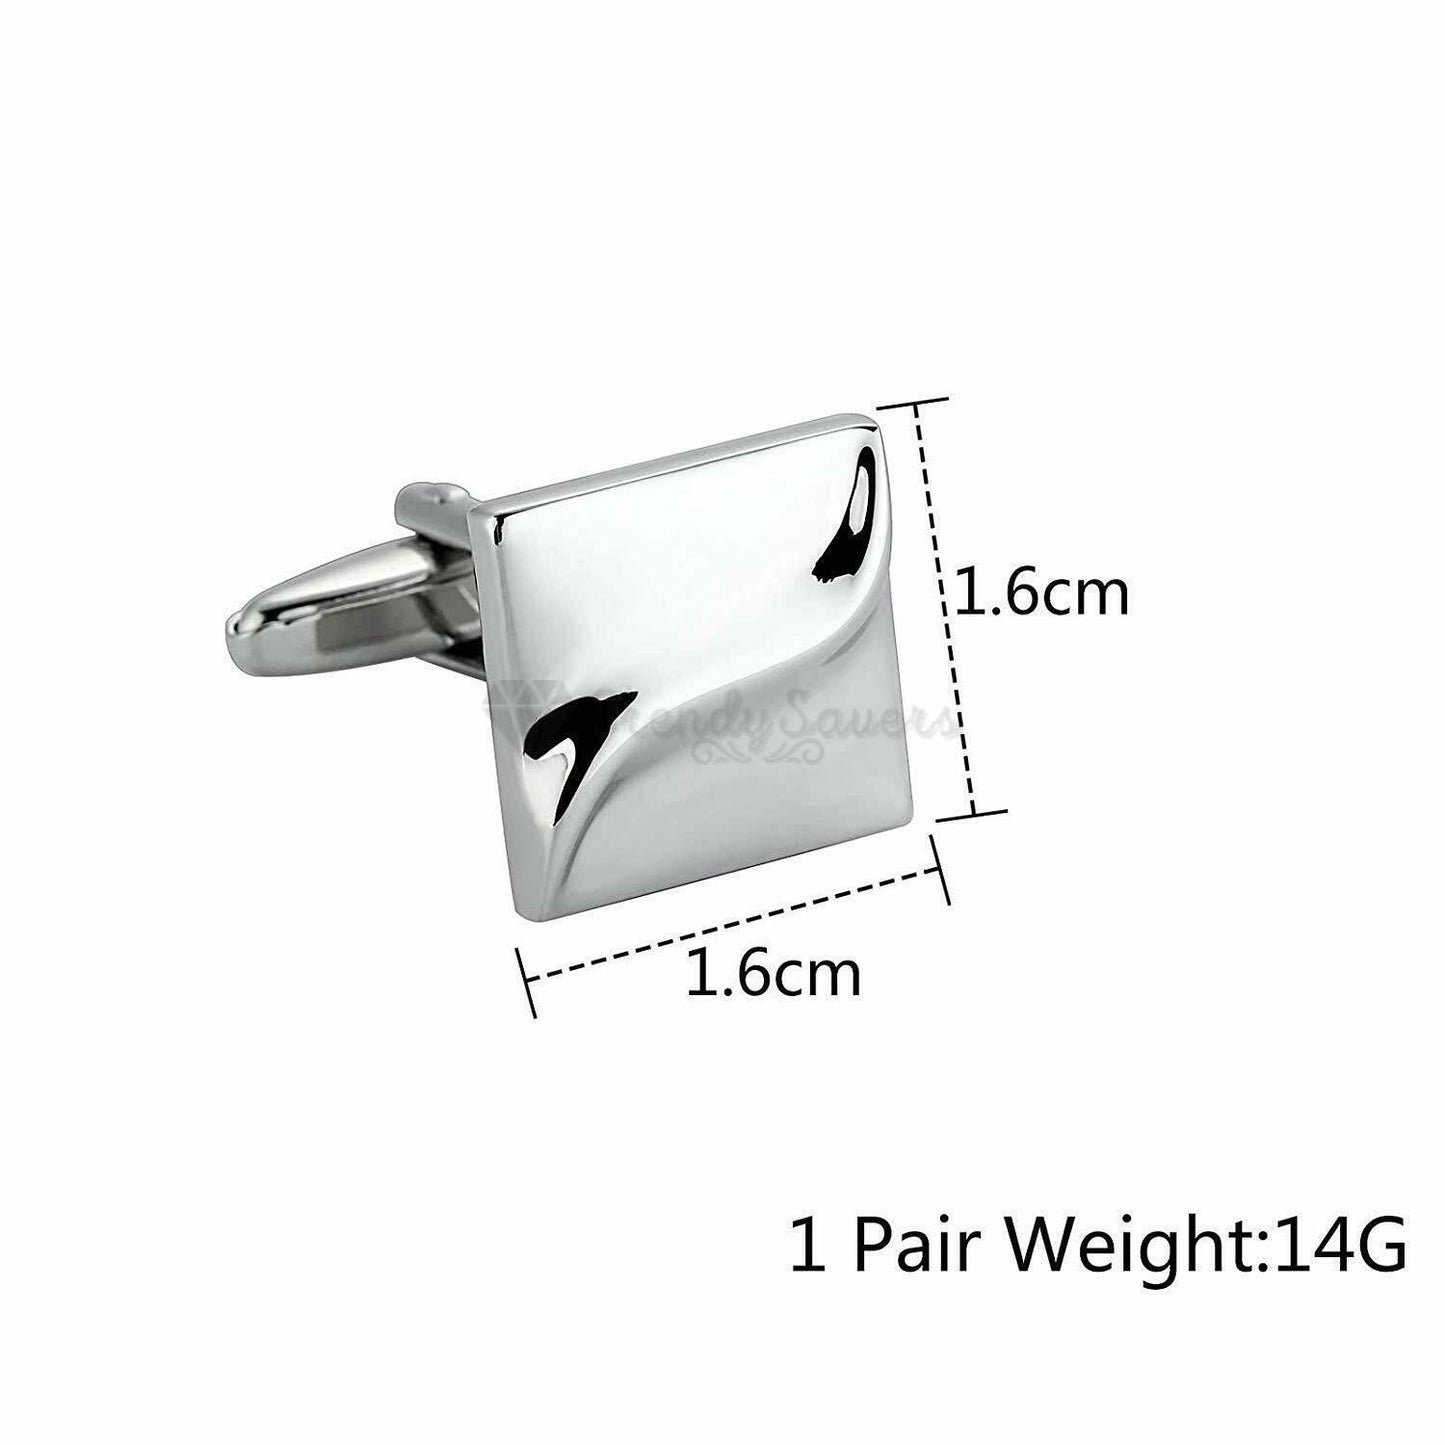 Silver Plated Square Shape Cuff Link Cufflink Shirt Wedding Suit Mens Accessory